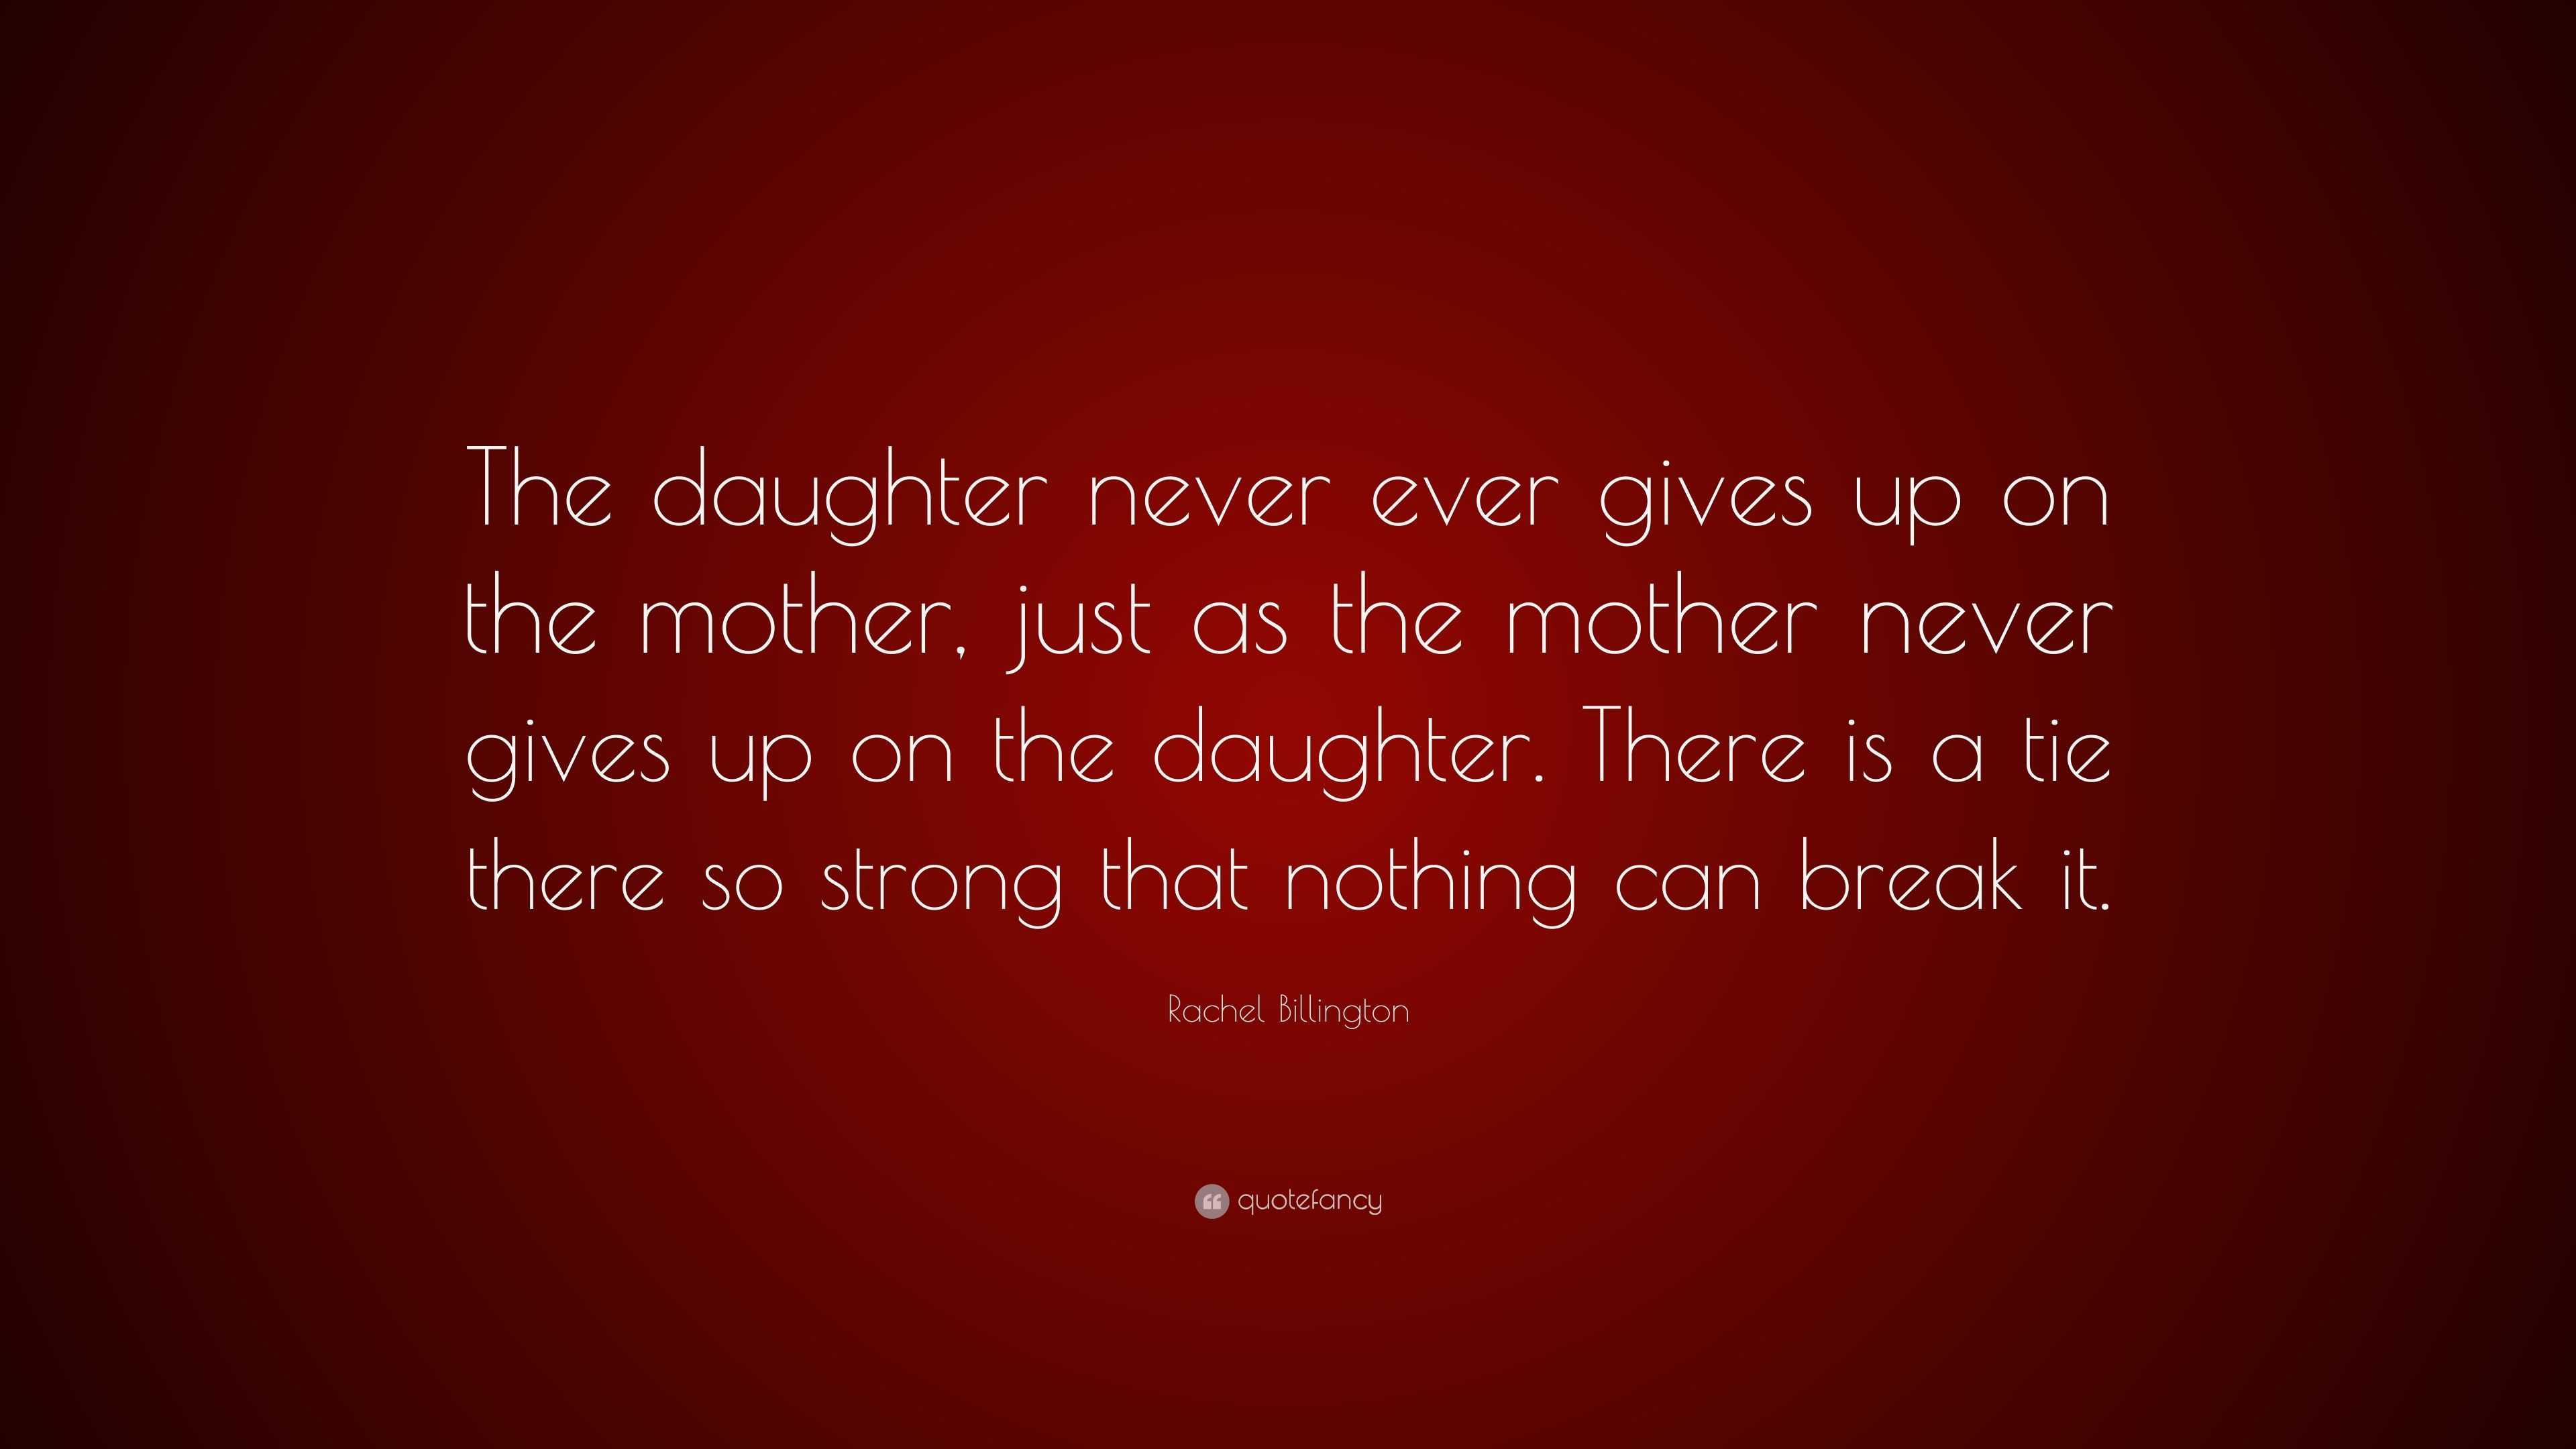 Rachel Billington Quote: “The daughter never ever gives up on the ...